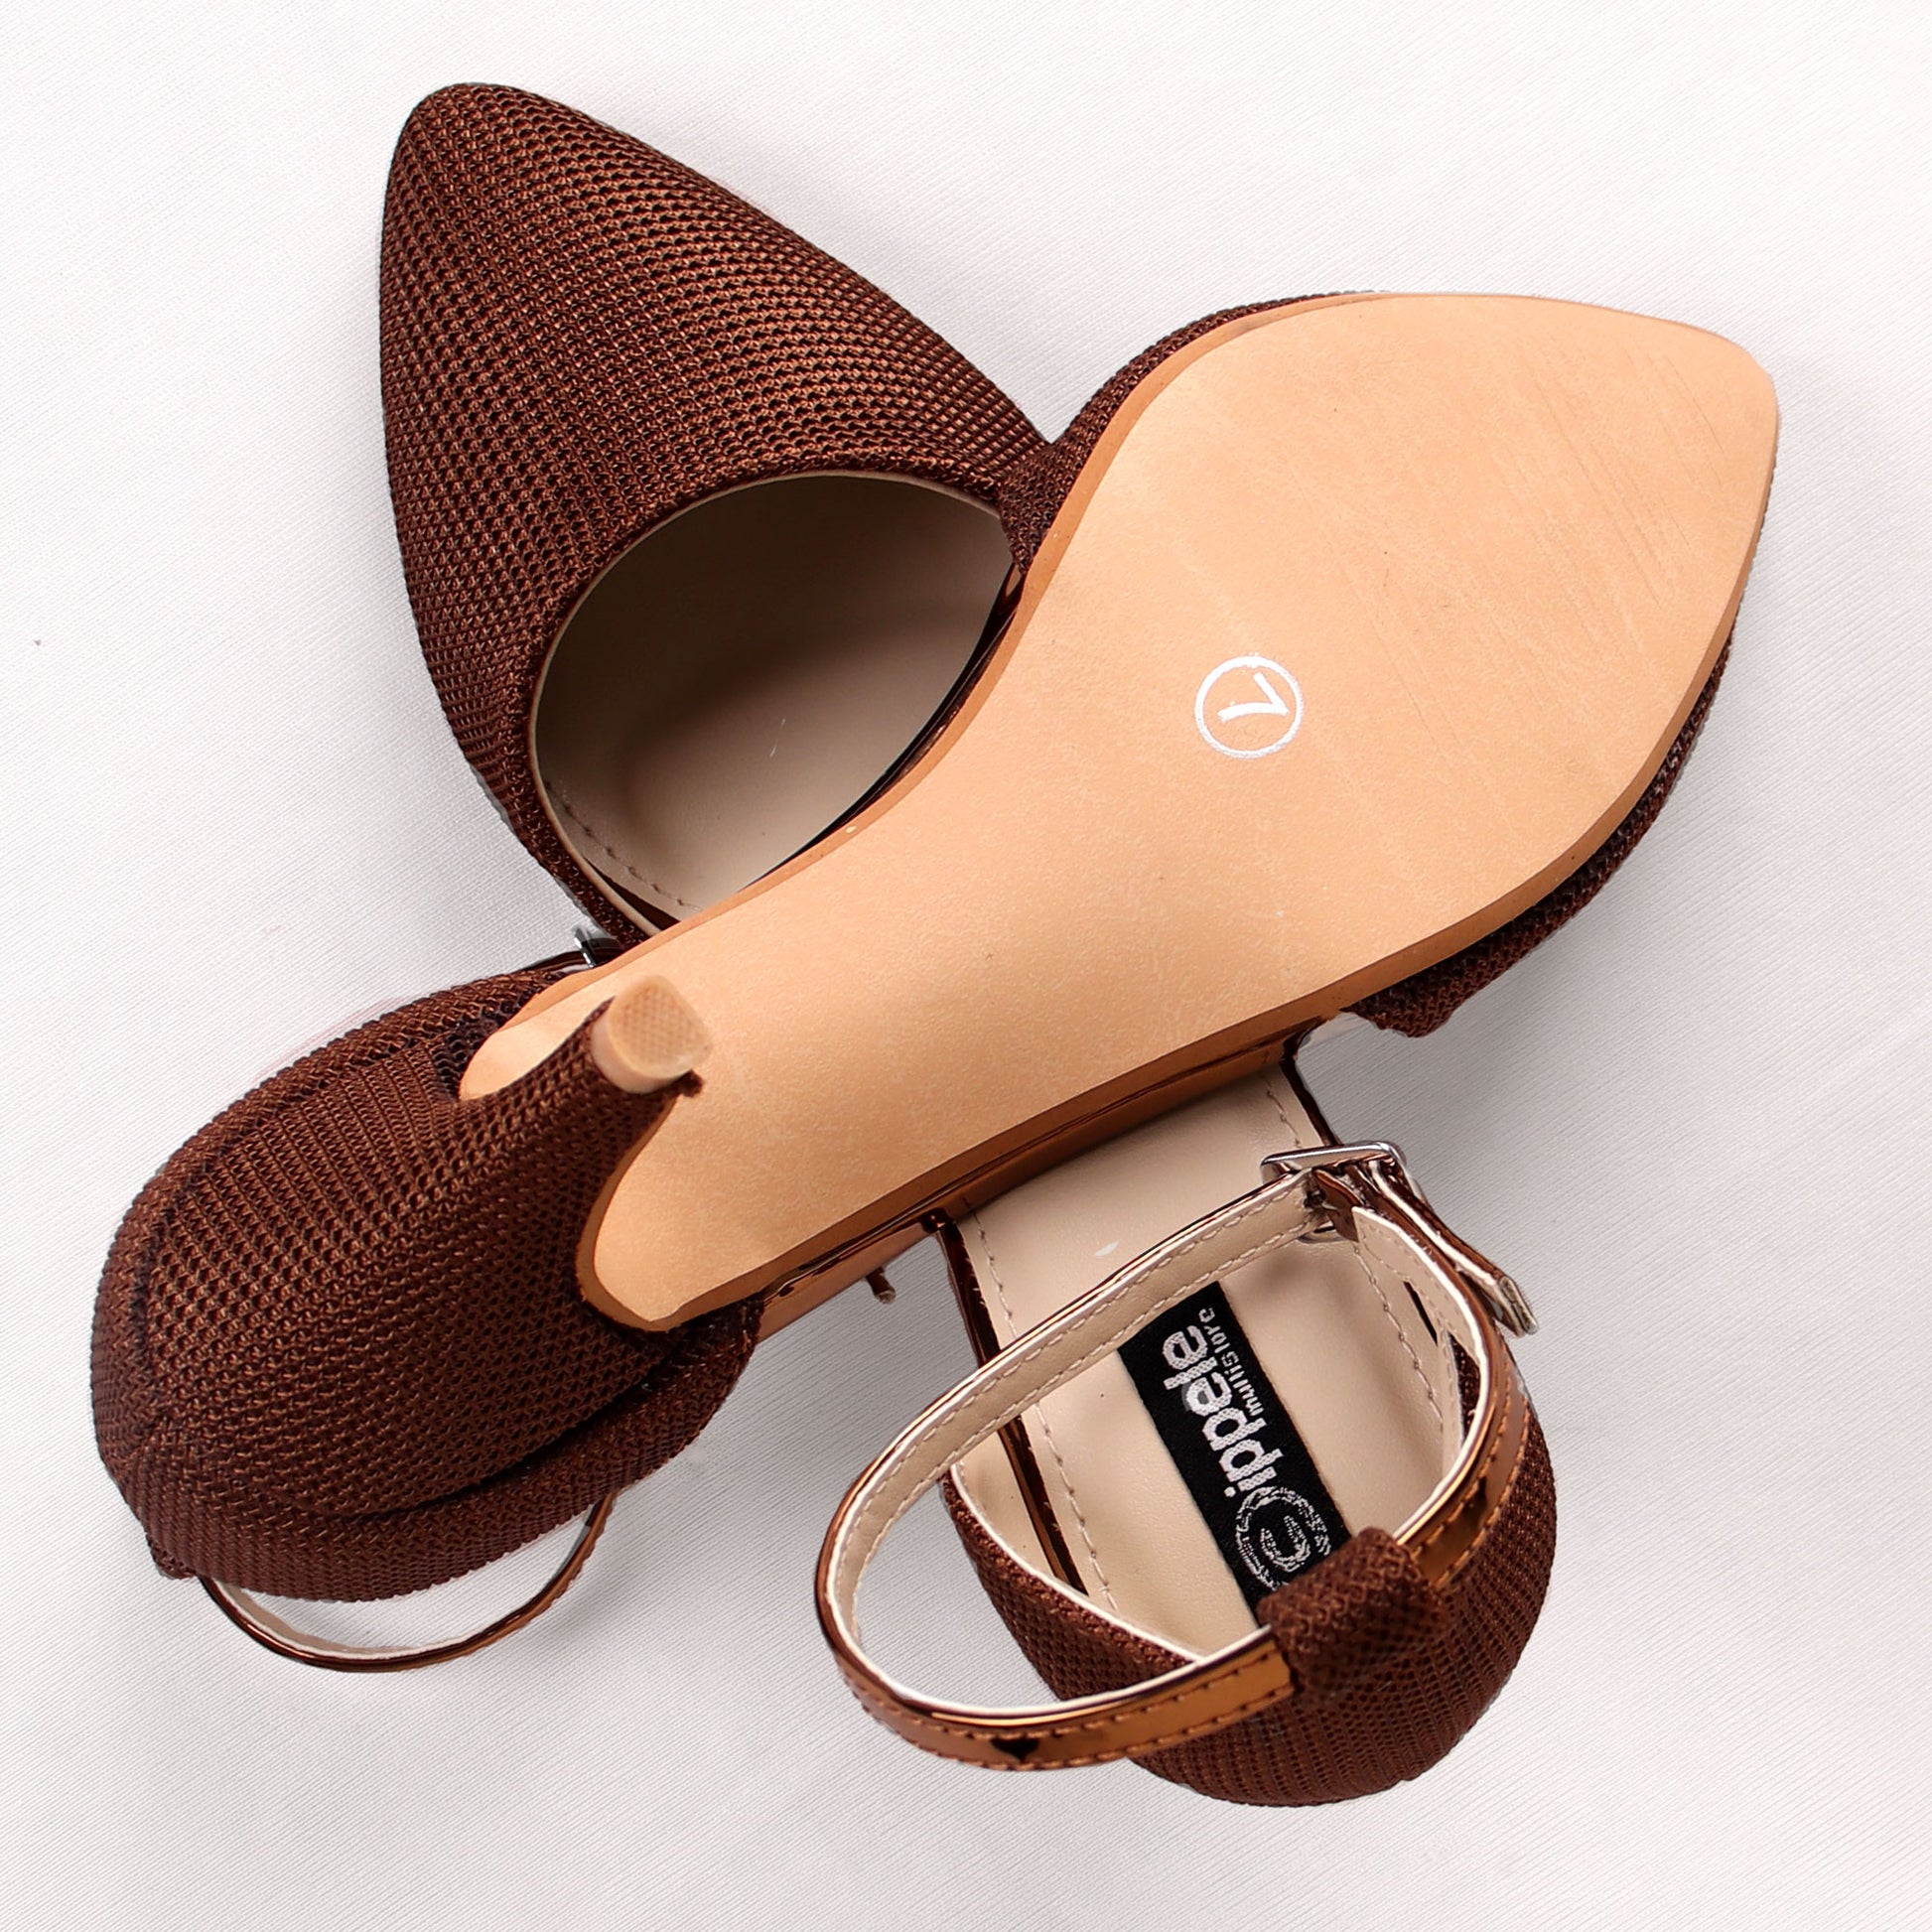 Foot Wear,The Quirky soft Sand Paper Heel in Brown - Cippele Multi Store